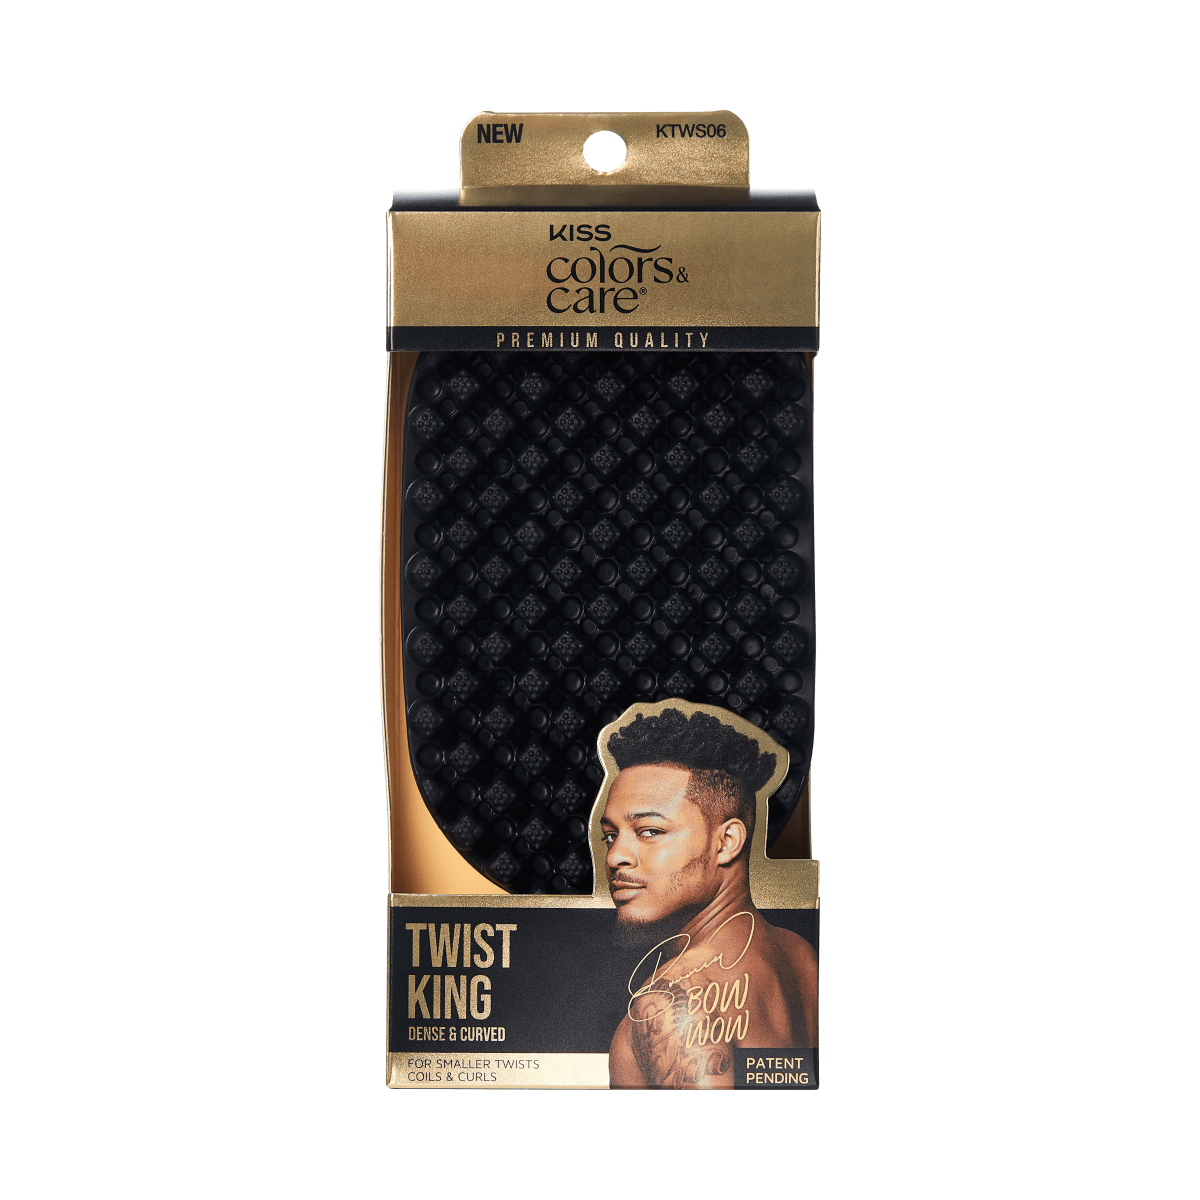 Twist King hair sponge, premium dense and curved twist sponge for smaller twists, coils and curls.